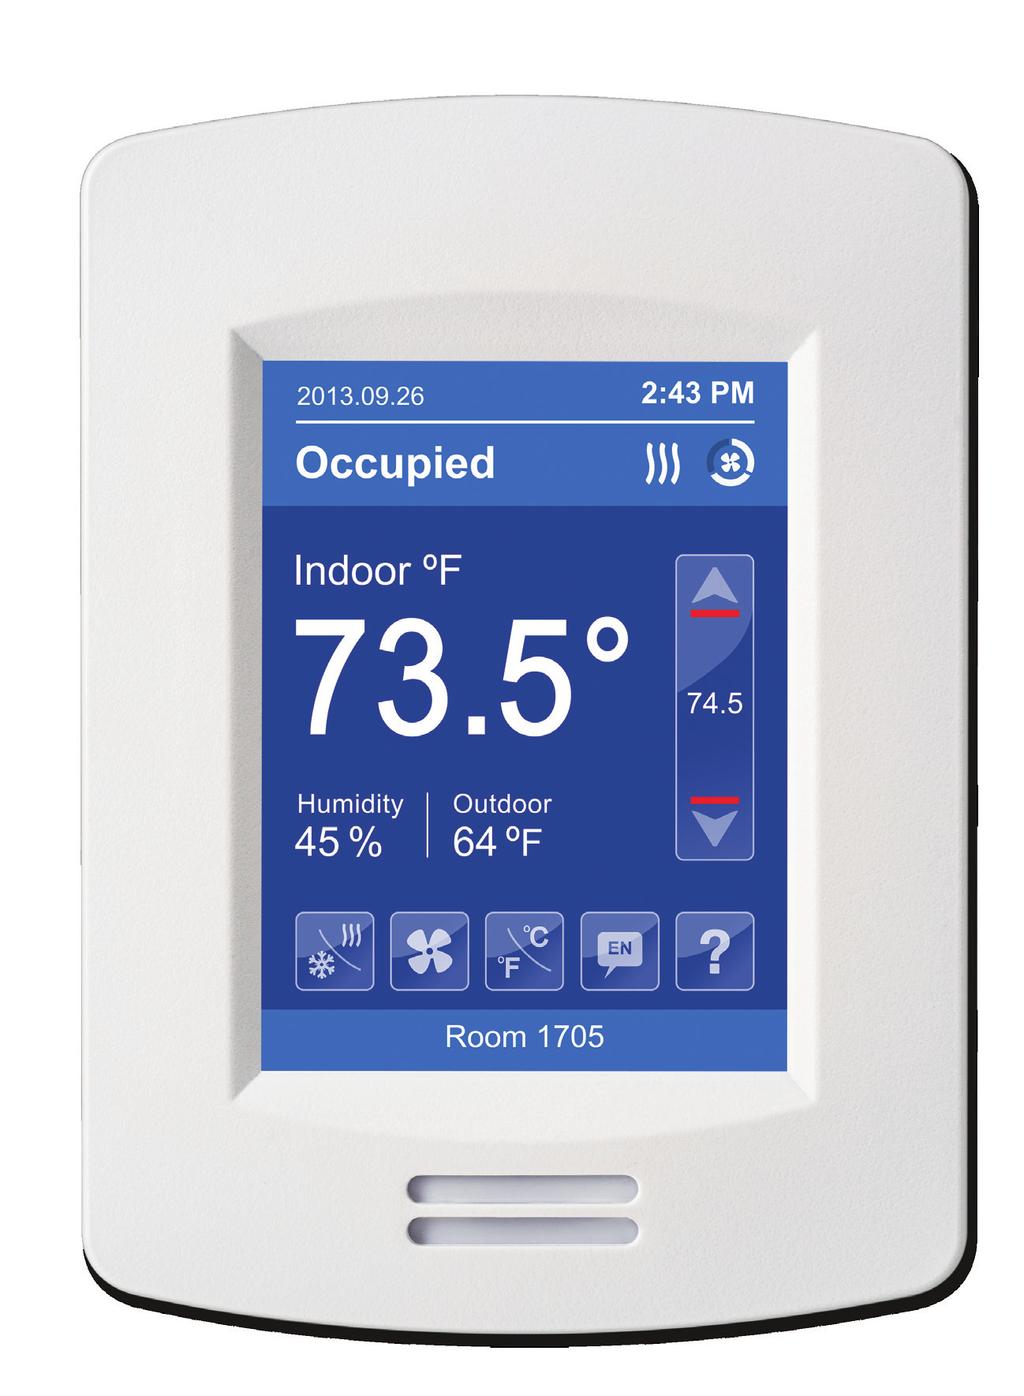 HOME SCREEN DISPLAY Hospitality User Interface Shown Date Occupancy Status Indoor Temperature Time System Status Fan Status Up Arrow Increase Temperature Setpoint Actual Setpoint Indoor Humidity